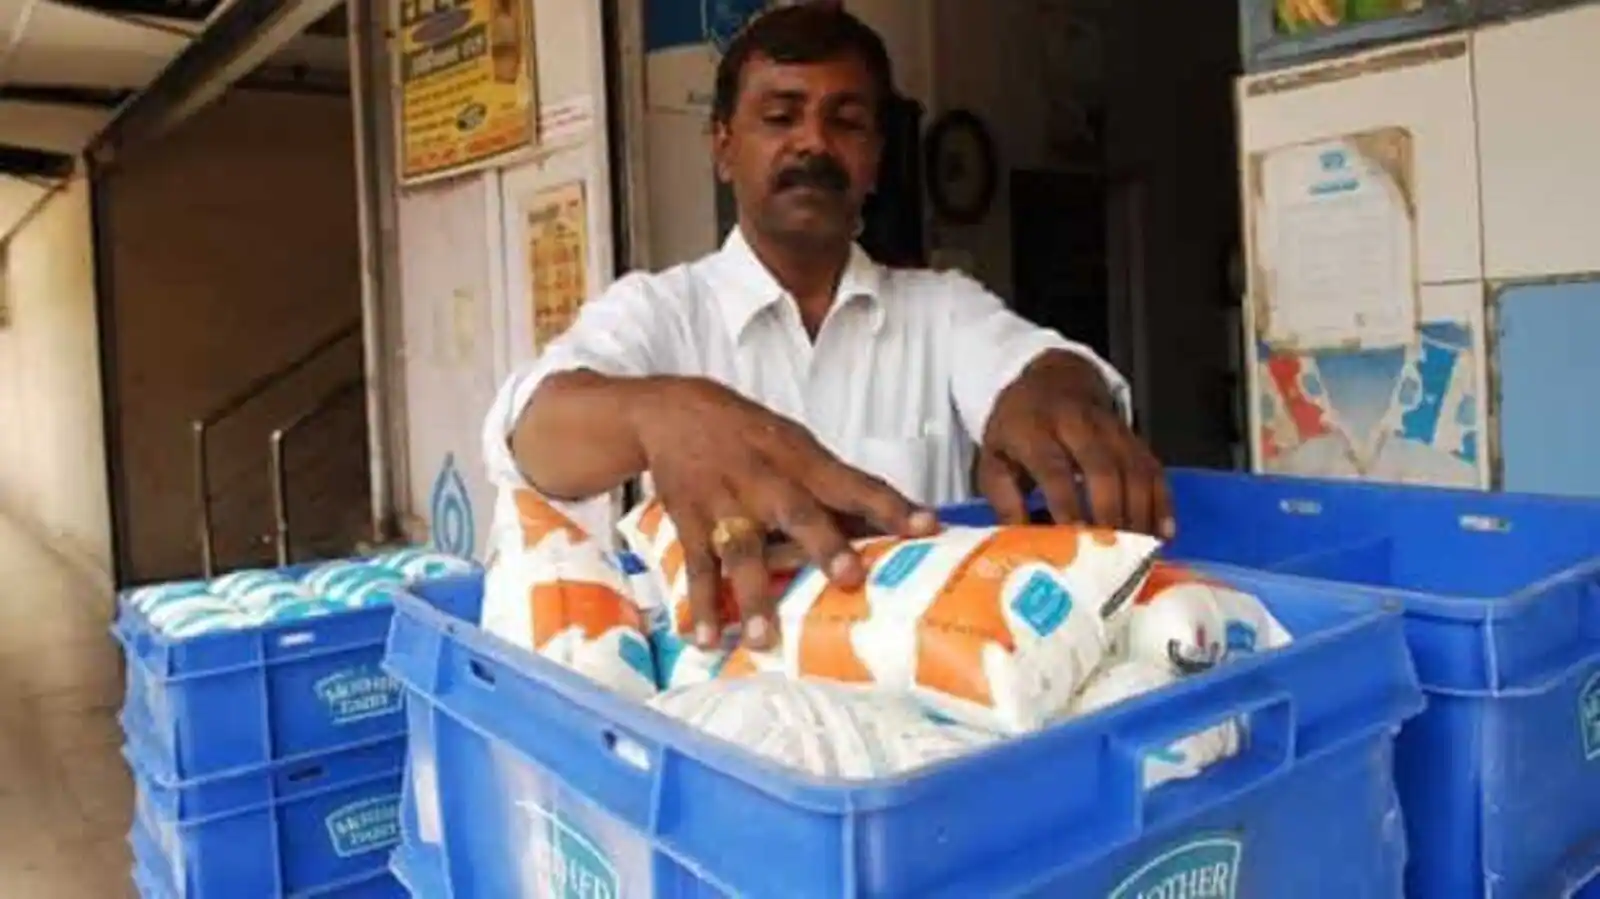 Milk Production in India Surges by 22.81% in Past 5 Years, with Uttar Pradesh Leading the Way